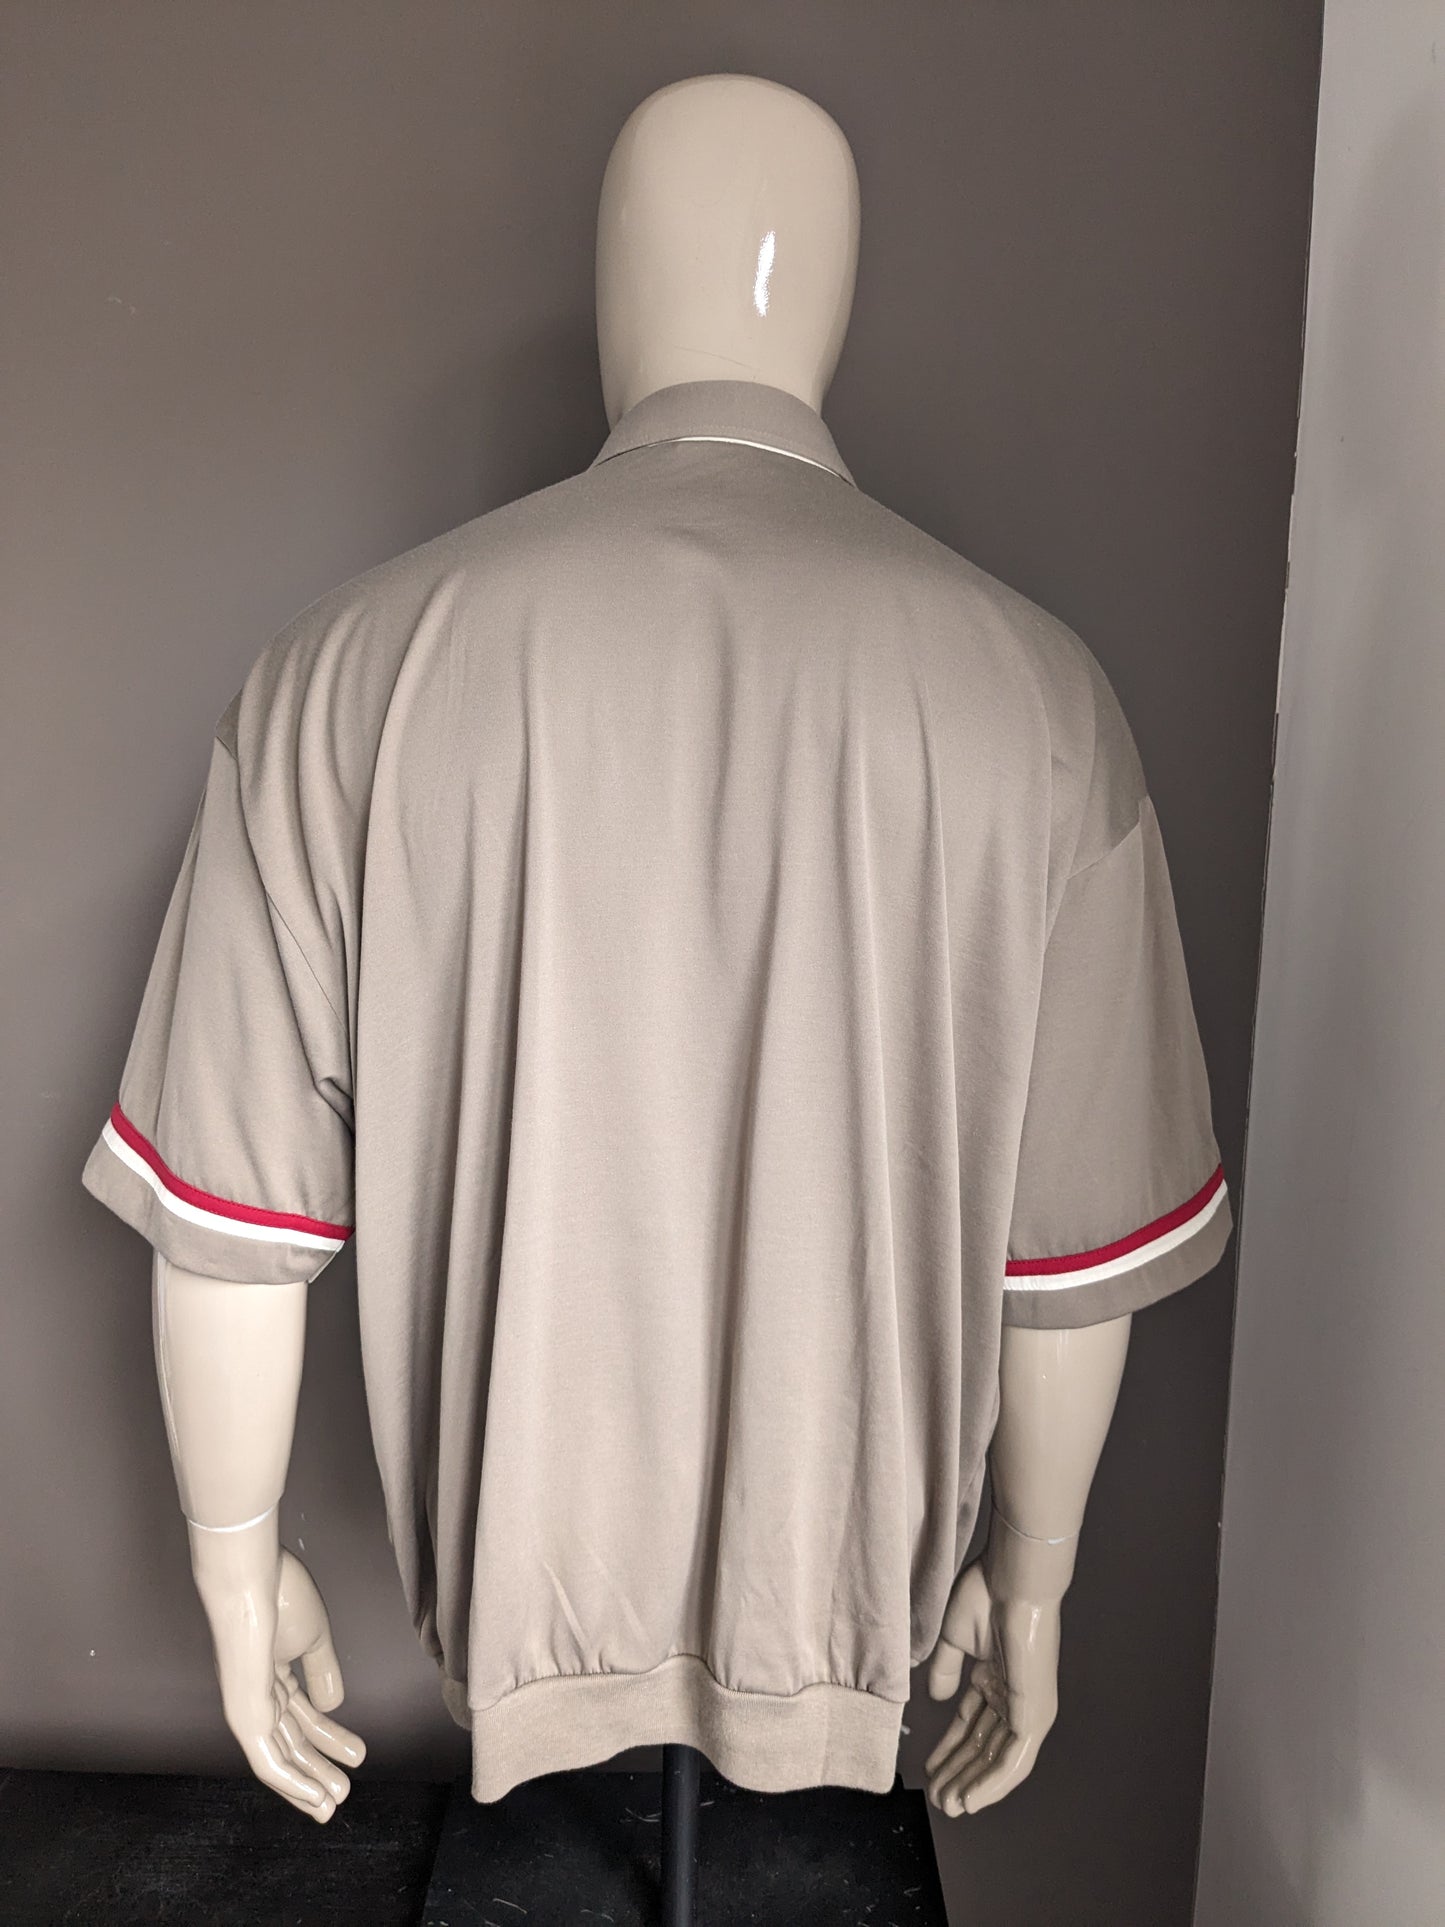 Vintage polo with elastic band. Brown beige red colored. Size 3XL.